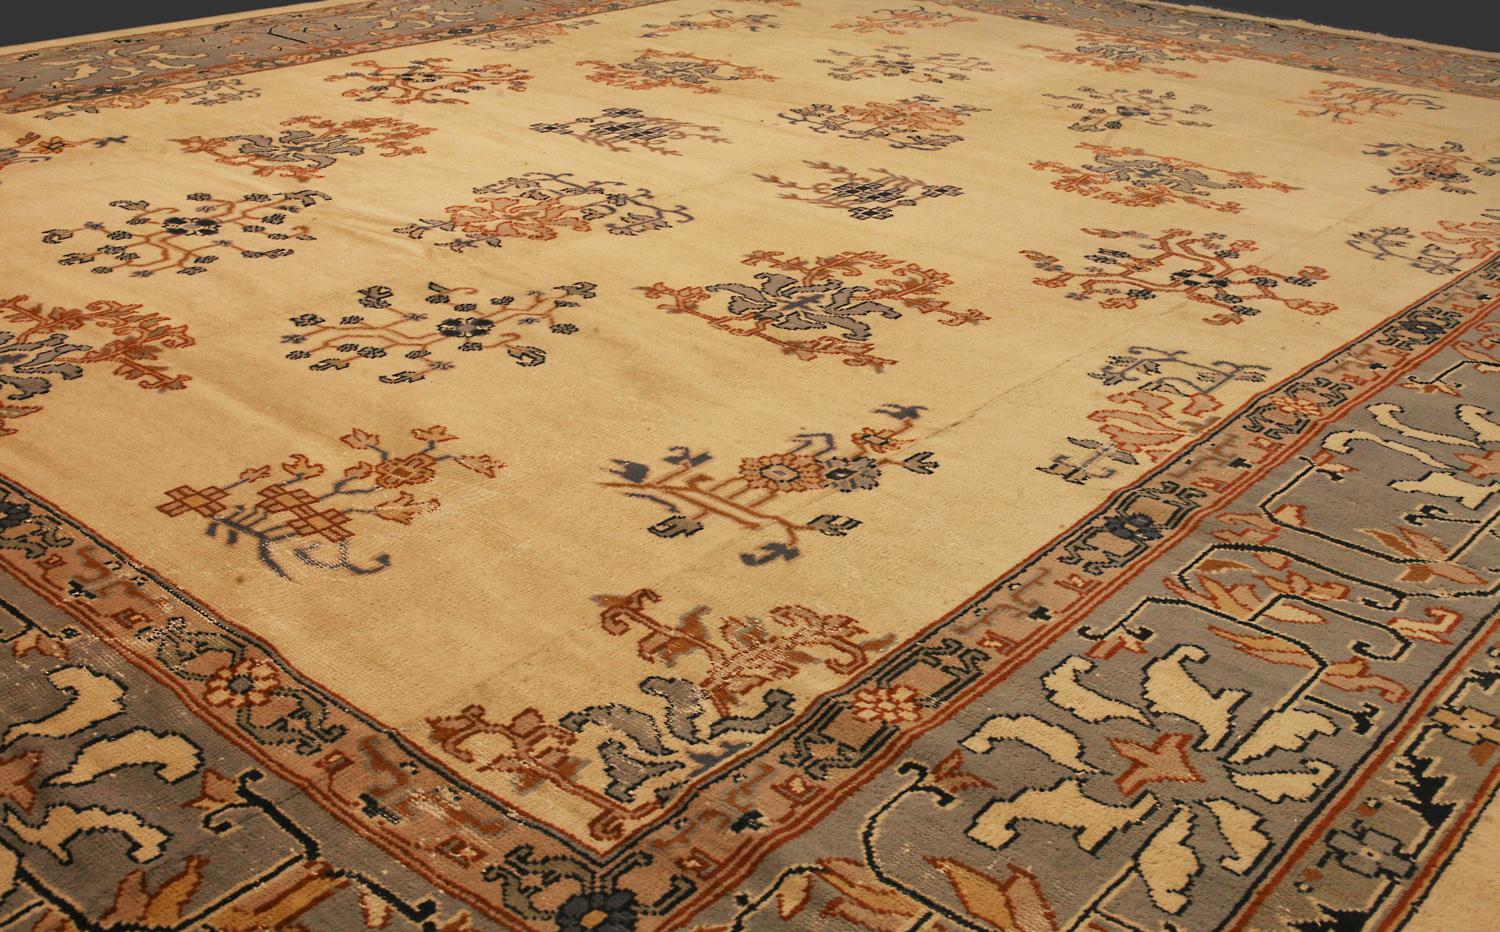 This is an antique Turkish Izmir carpet woven during the first quarter of the 20th century circa 1920s and measures 440 x 370 CM in size. It has an all-over design with different large-scale floral motifs drawn geometrically and spread throughout